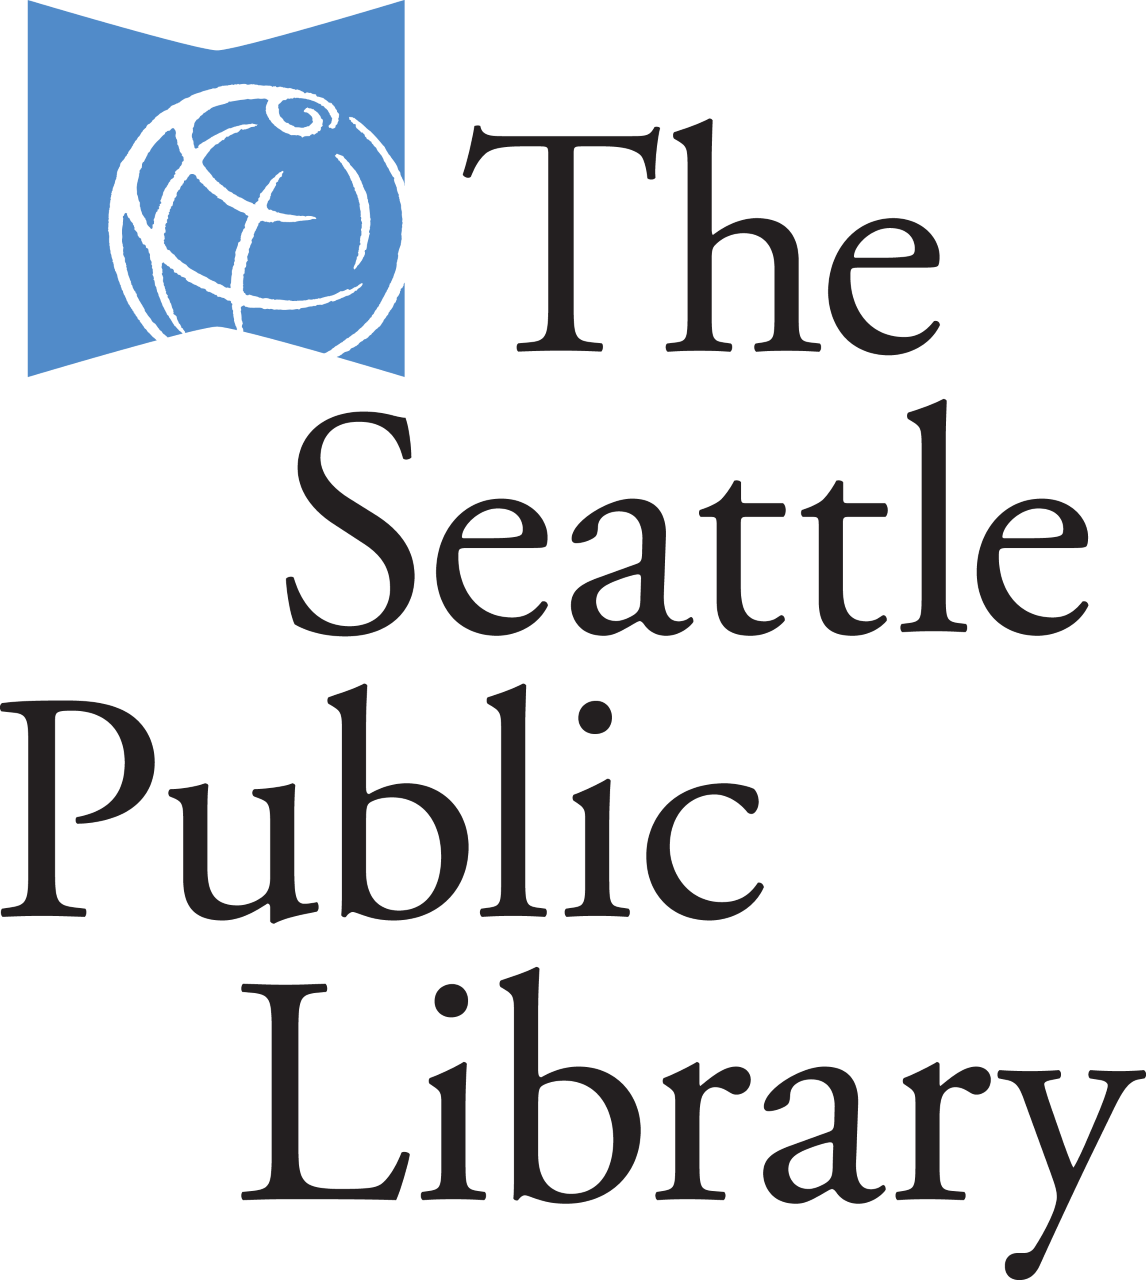 1-FRONT-BEST-library-logo.png